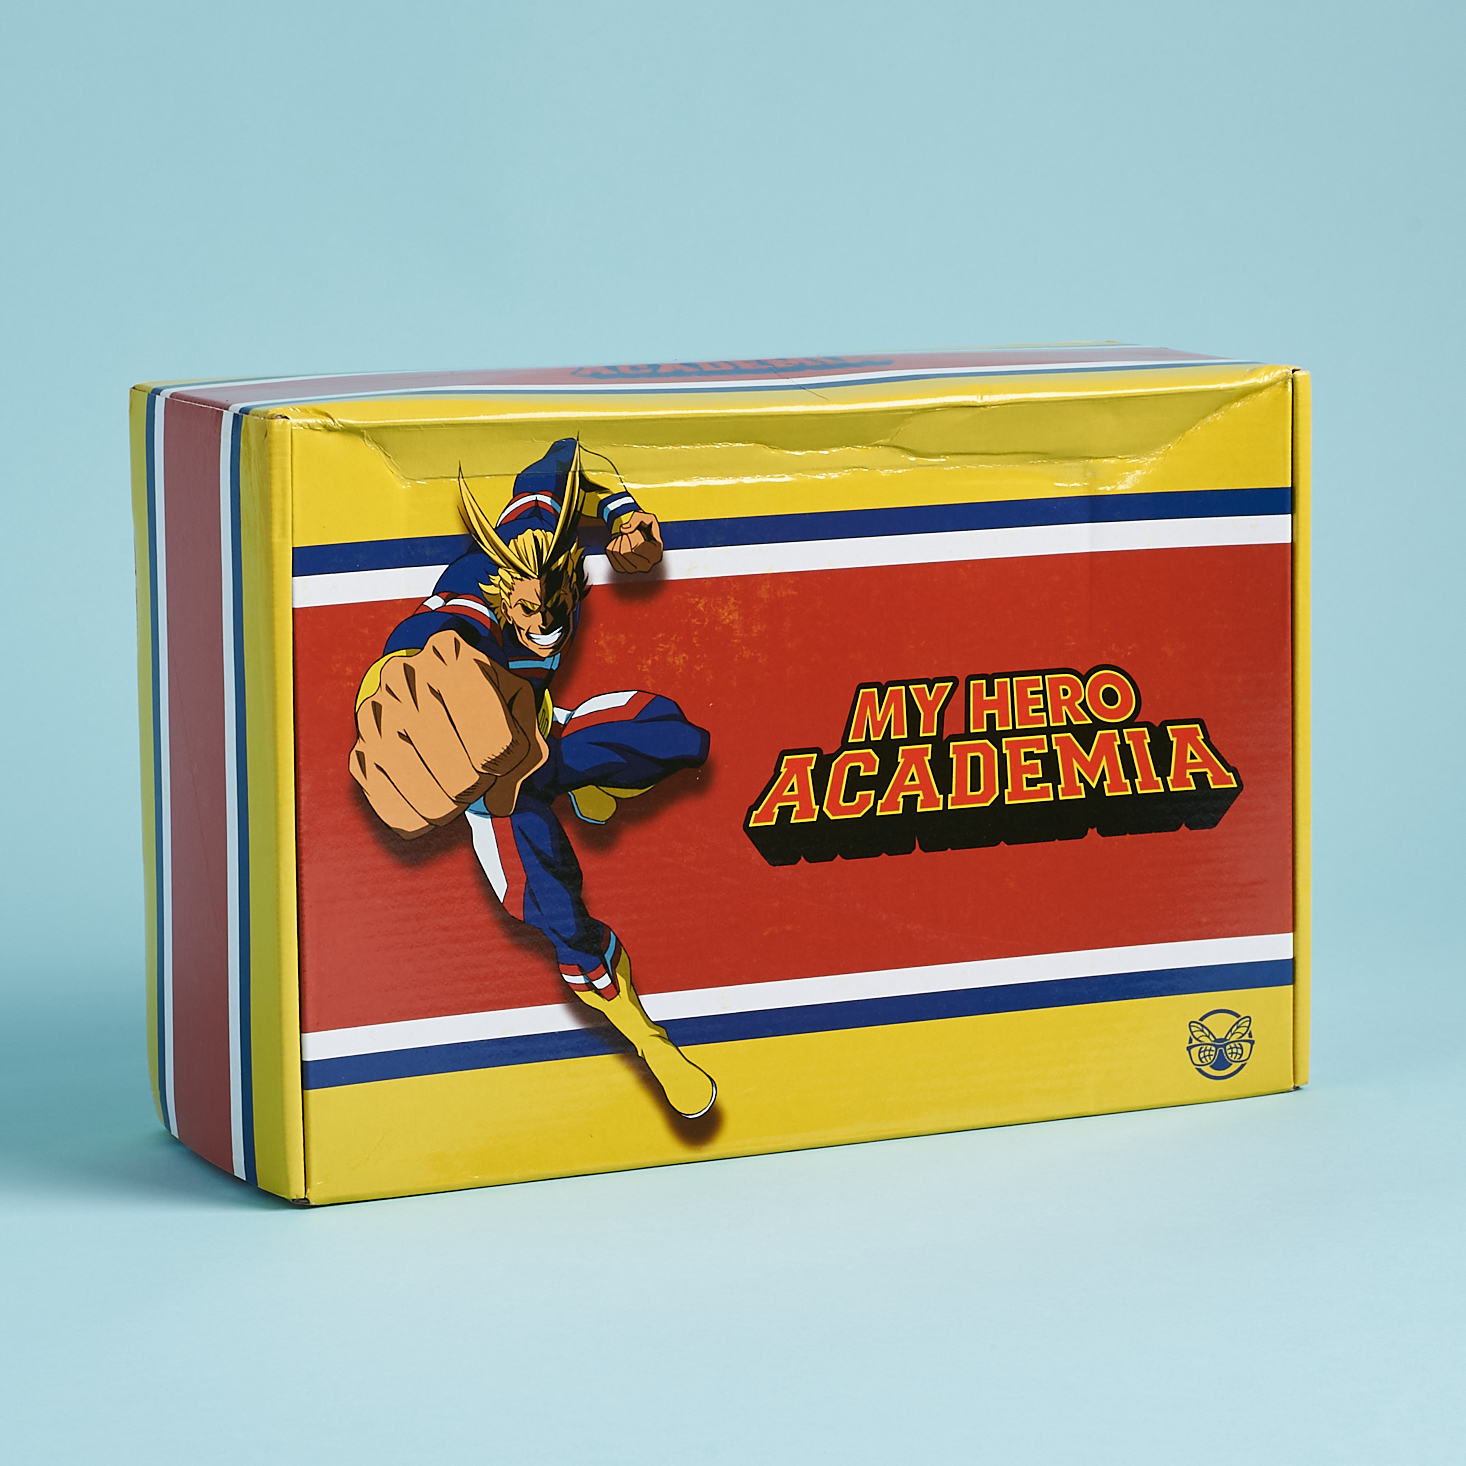 CultureFly My Hero Academia Box Review – Summer 2020